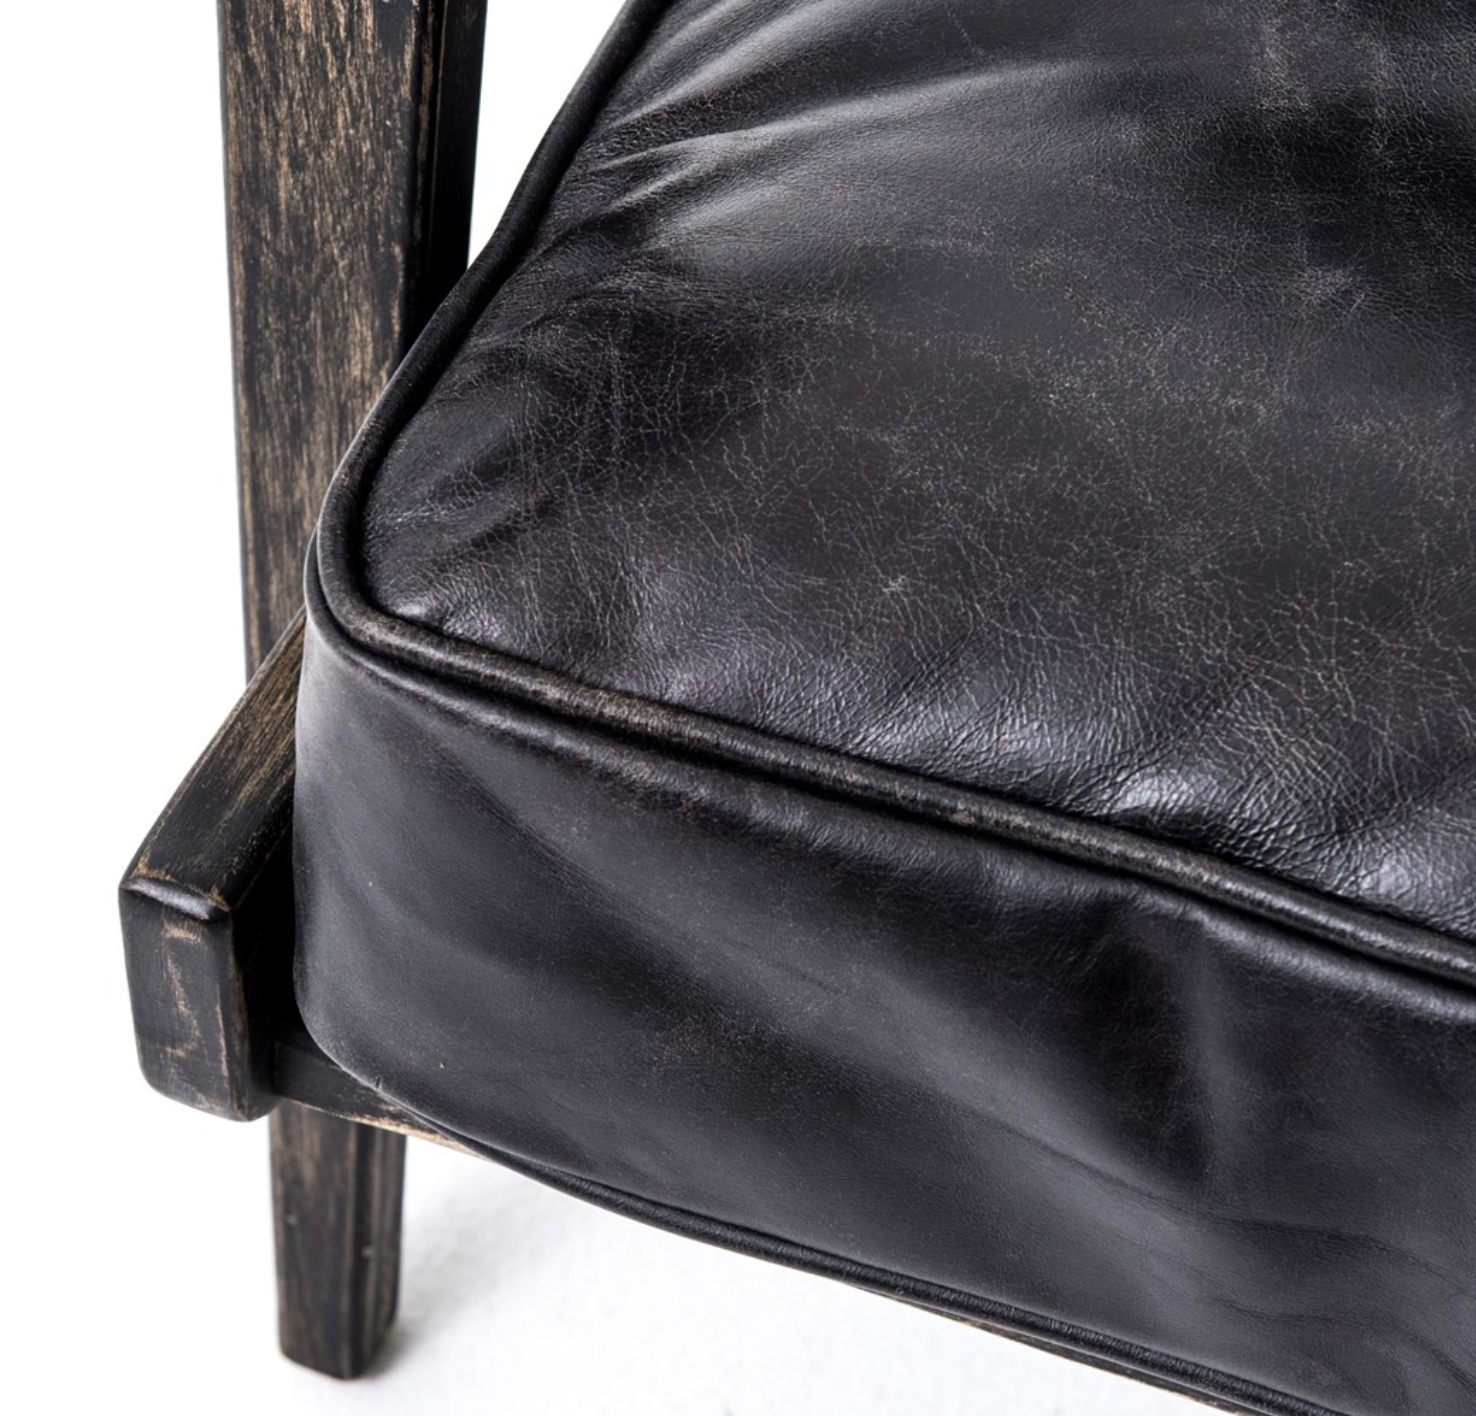  black leather chair, wood legs, wood frame, wood arms, cleaning 